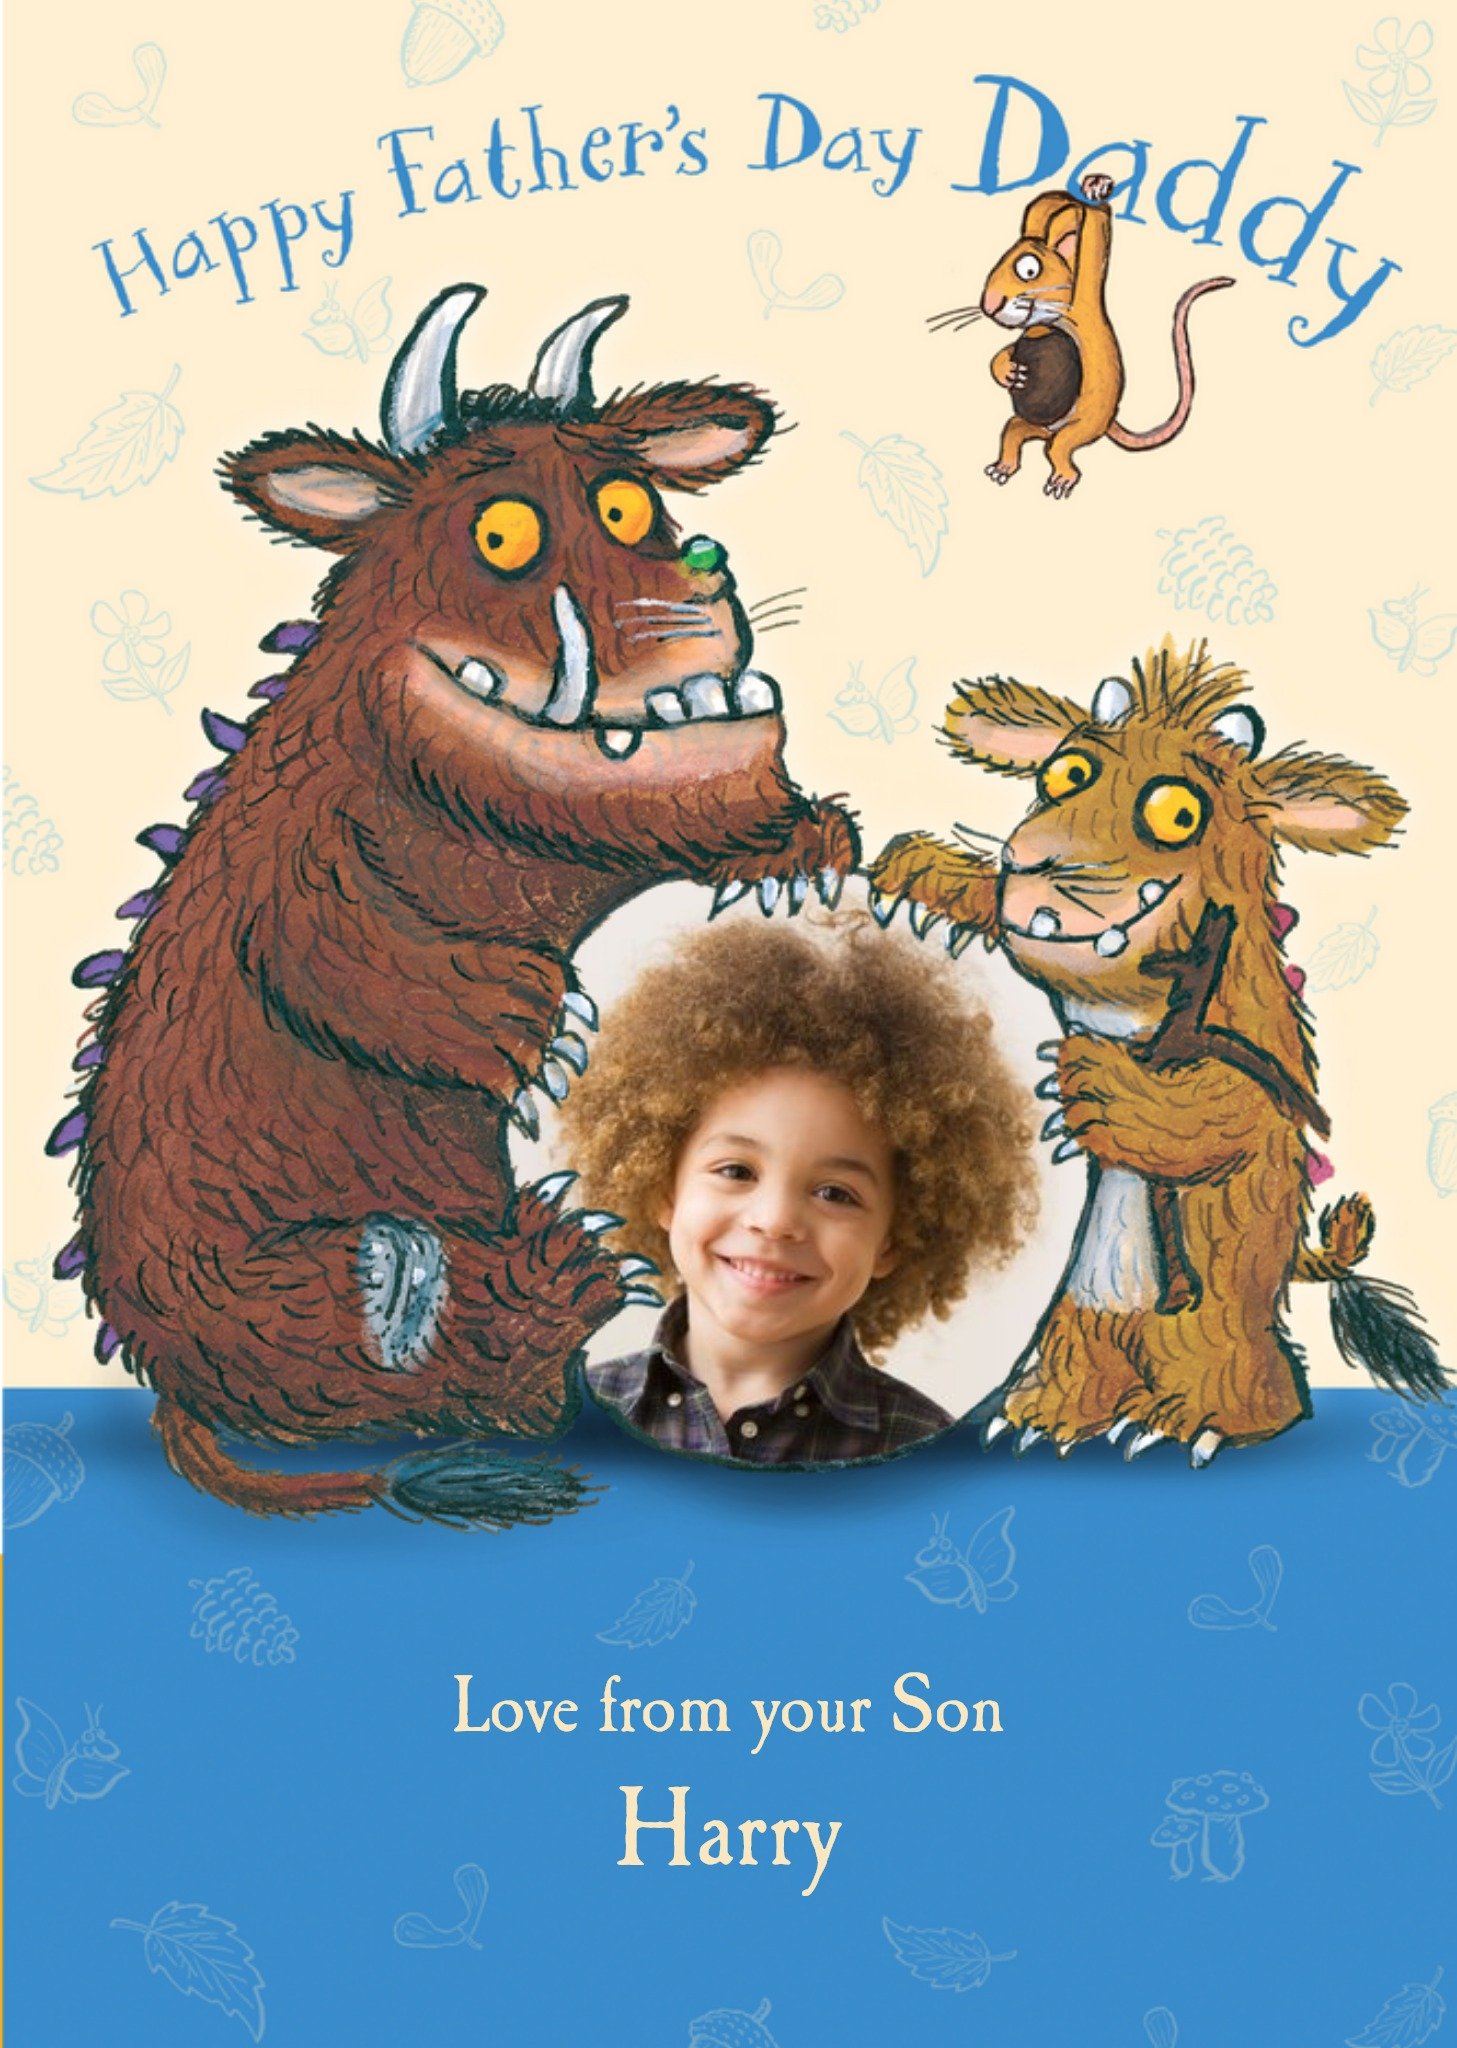 The Gruffalo And Happy Children Father's Day Photo Card, Large